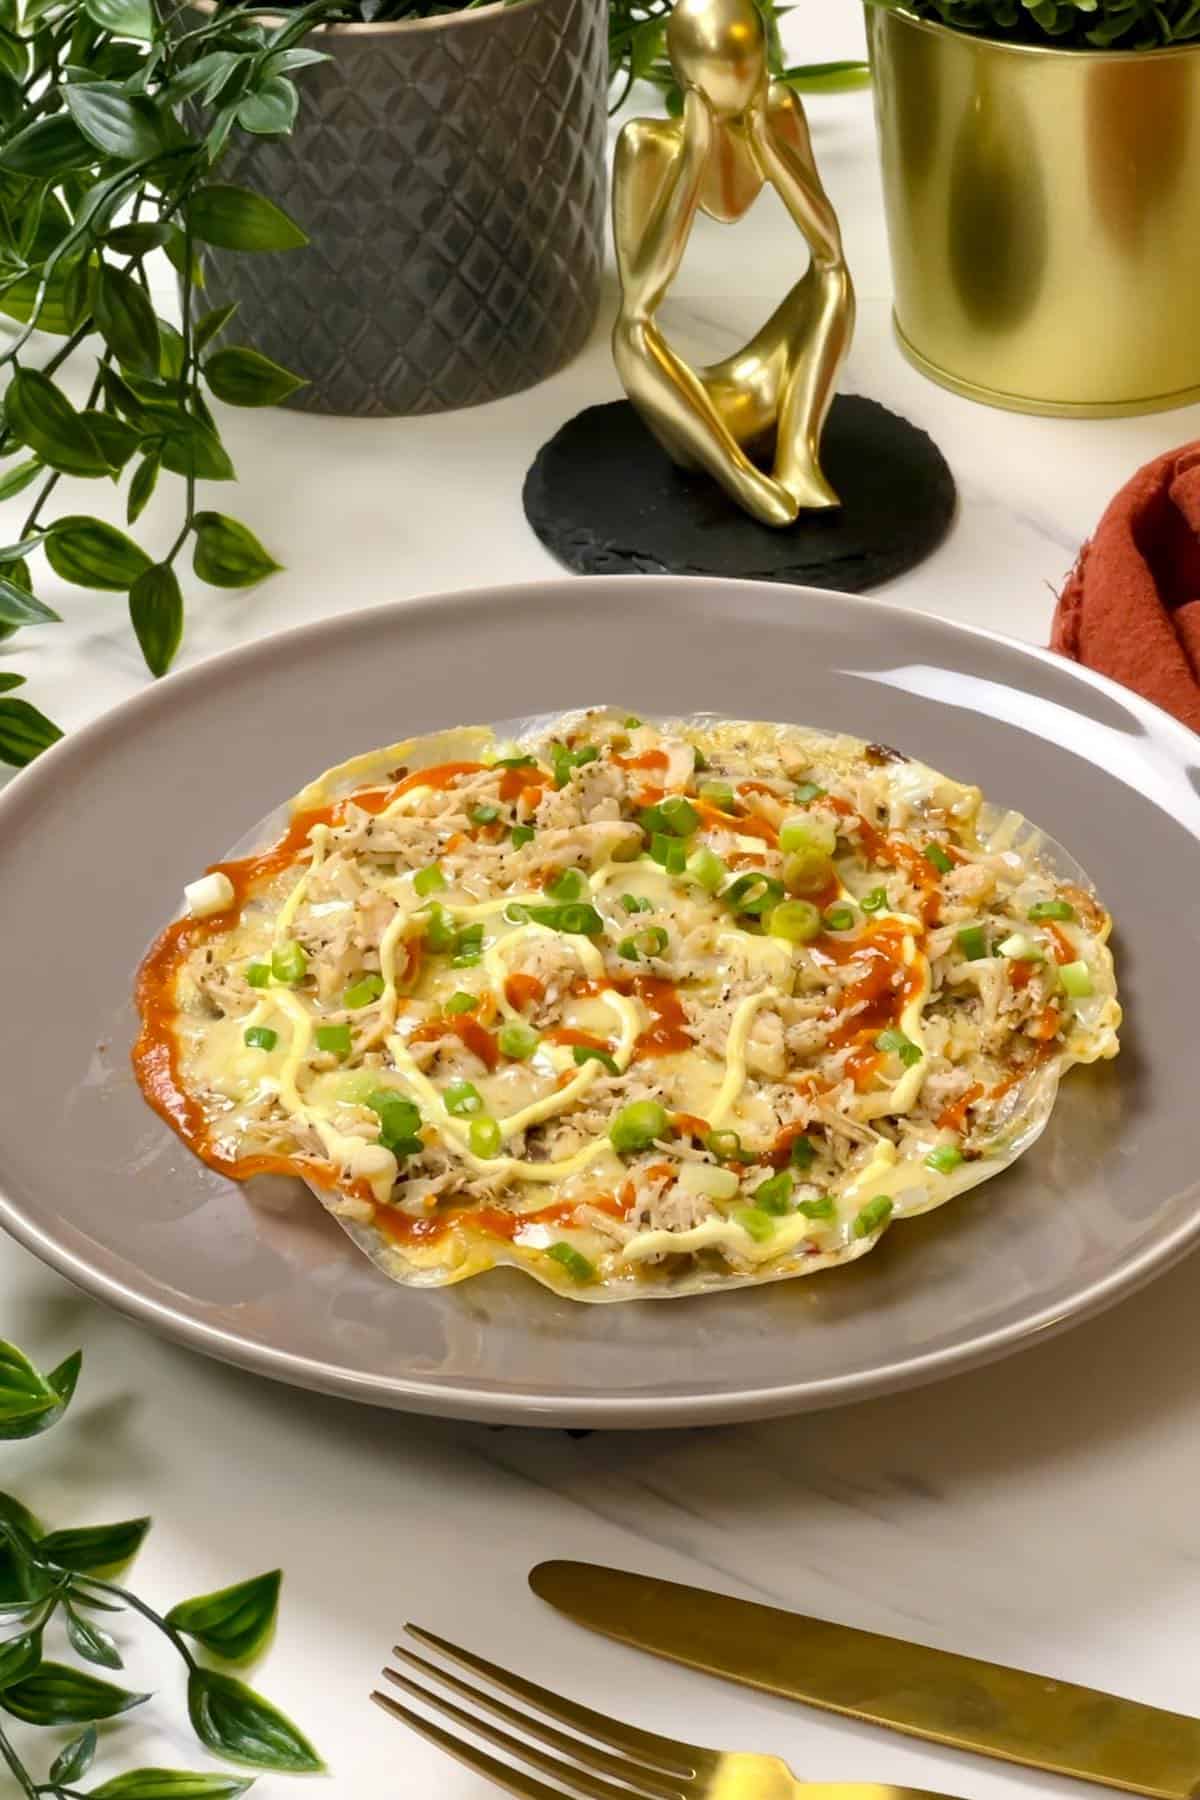 opened faced rice paper omelette served on a plate